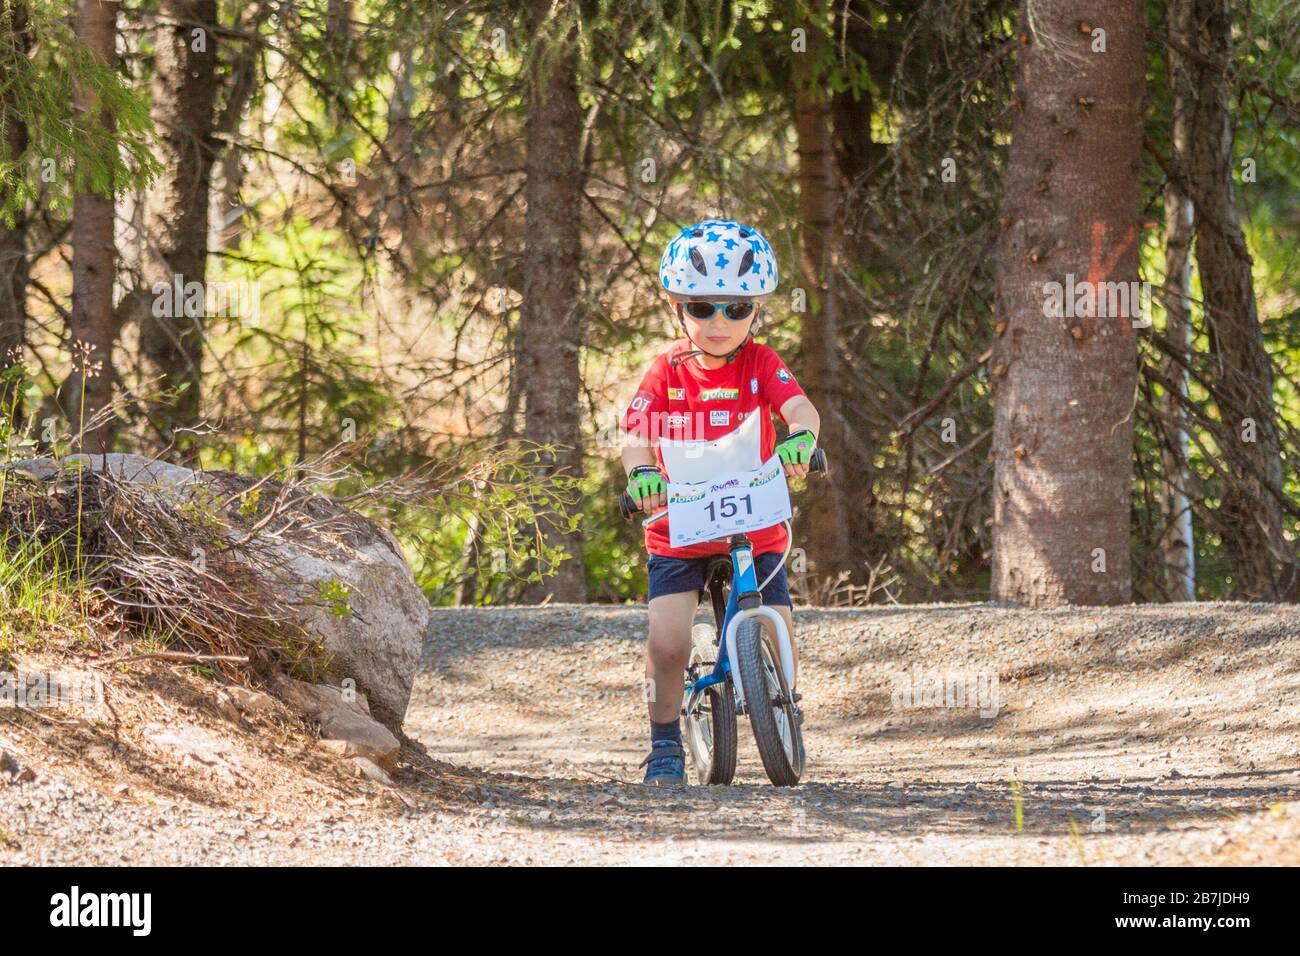 2-3 year old kid on kick-bike, with sunglasses and helmet, at a bike park pump track Stock Photo